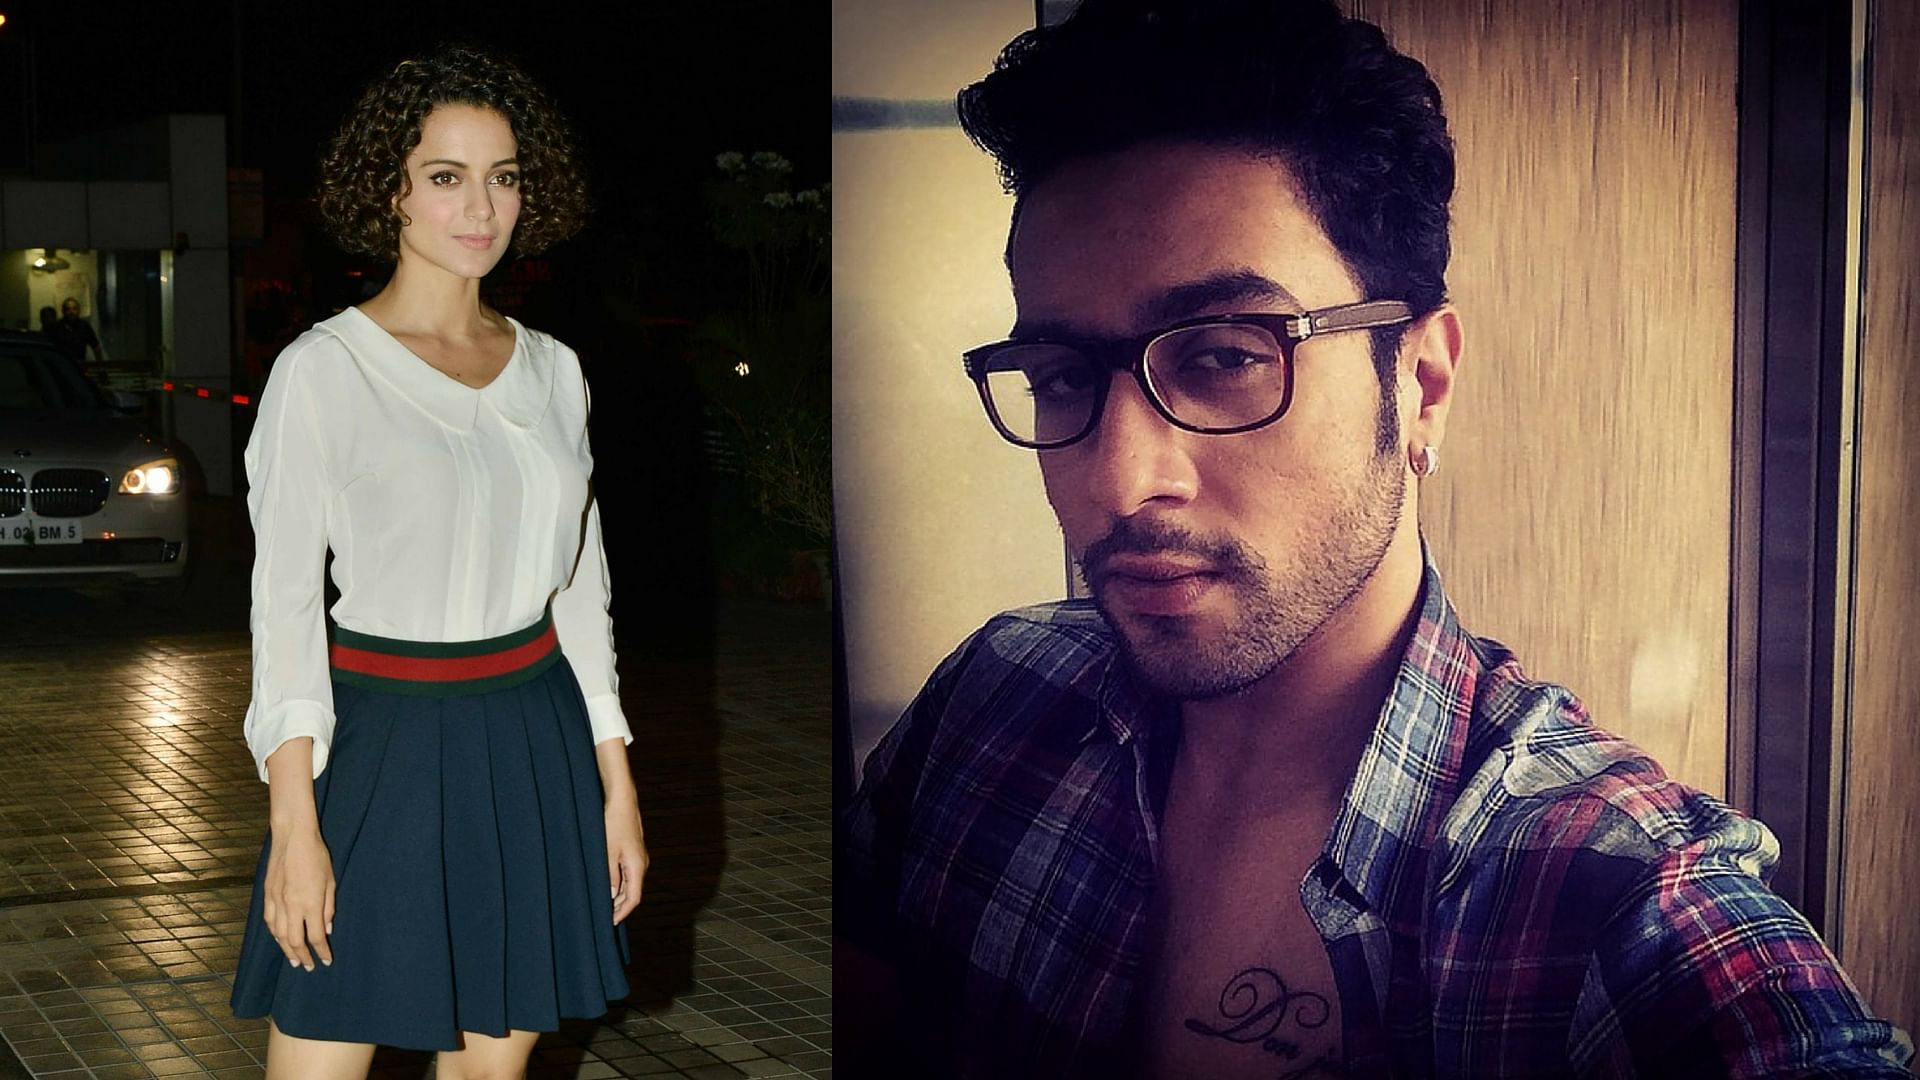 More is revealed in the Kangana Ranaut and Adhyayan Suman story (Photos: Twitter)